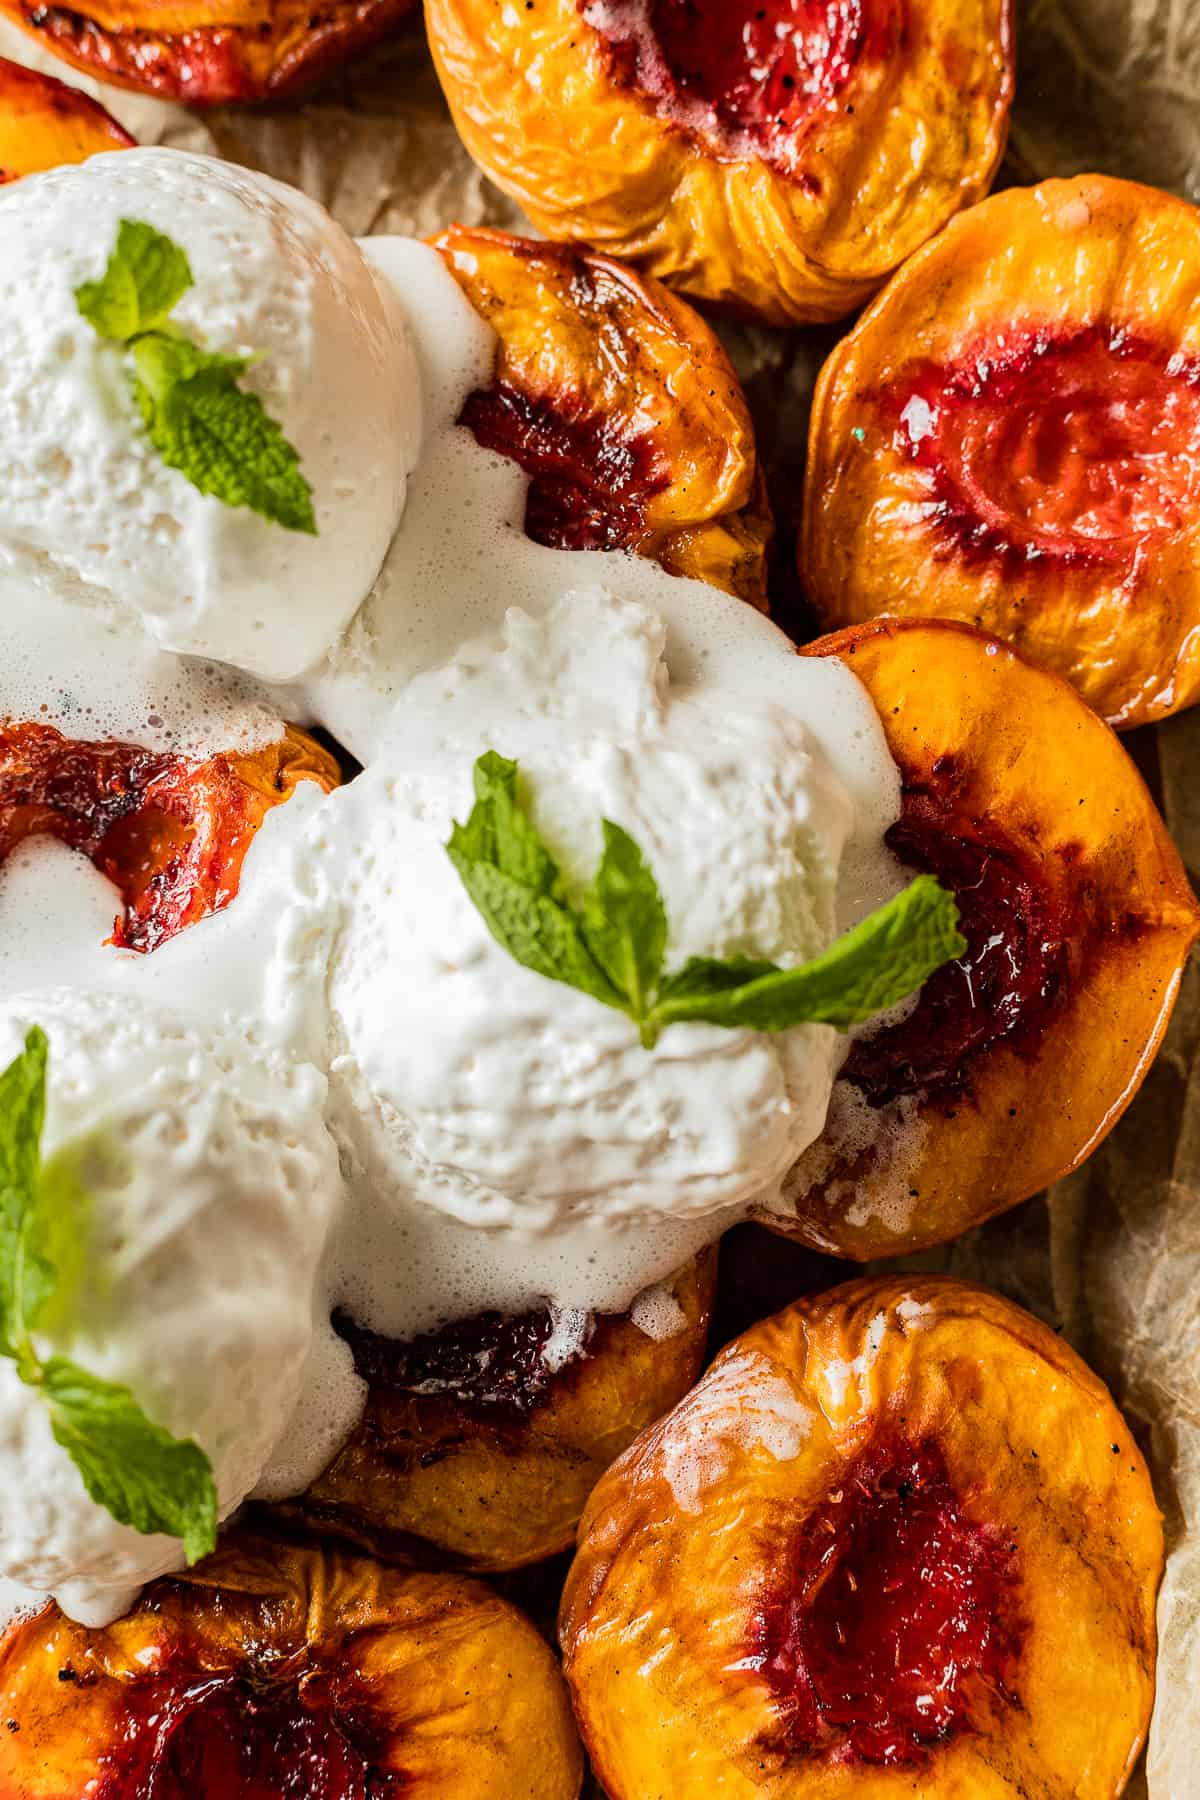 Smoked peaches with grill marks on a baking sheet topped with vanilla ice cream and mint leaves.